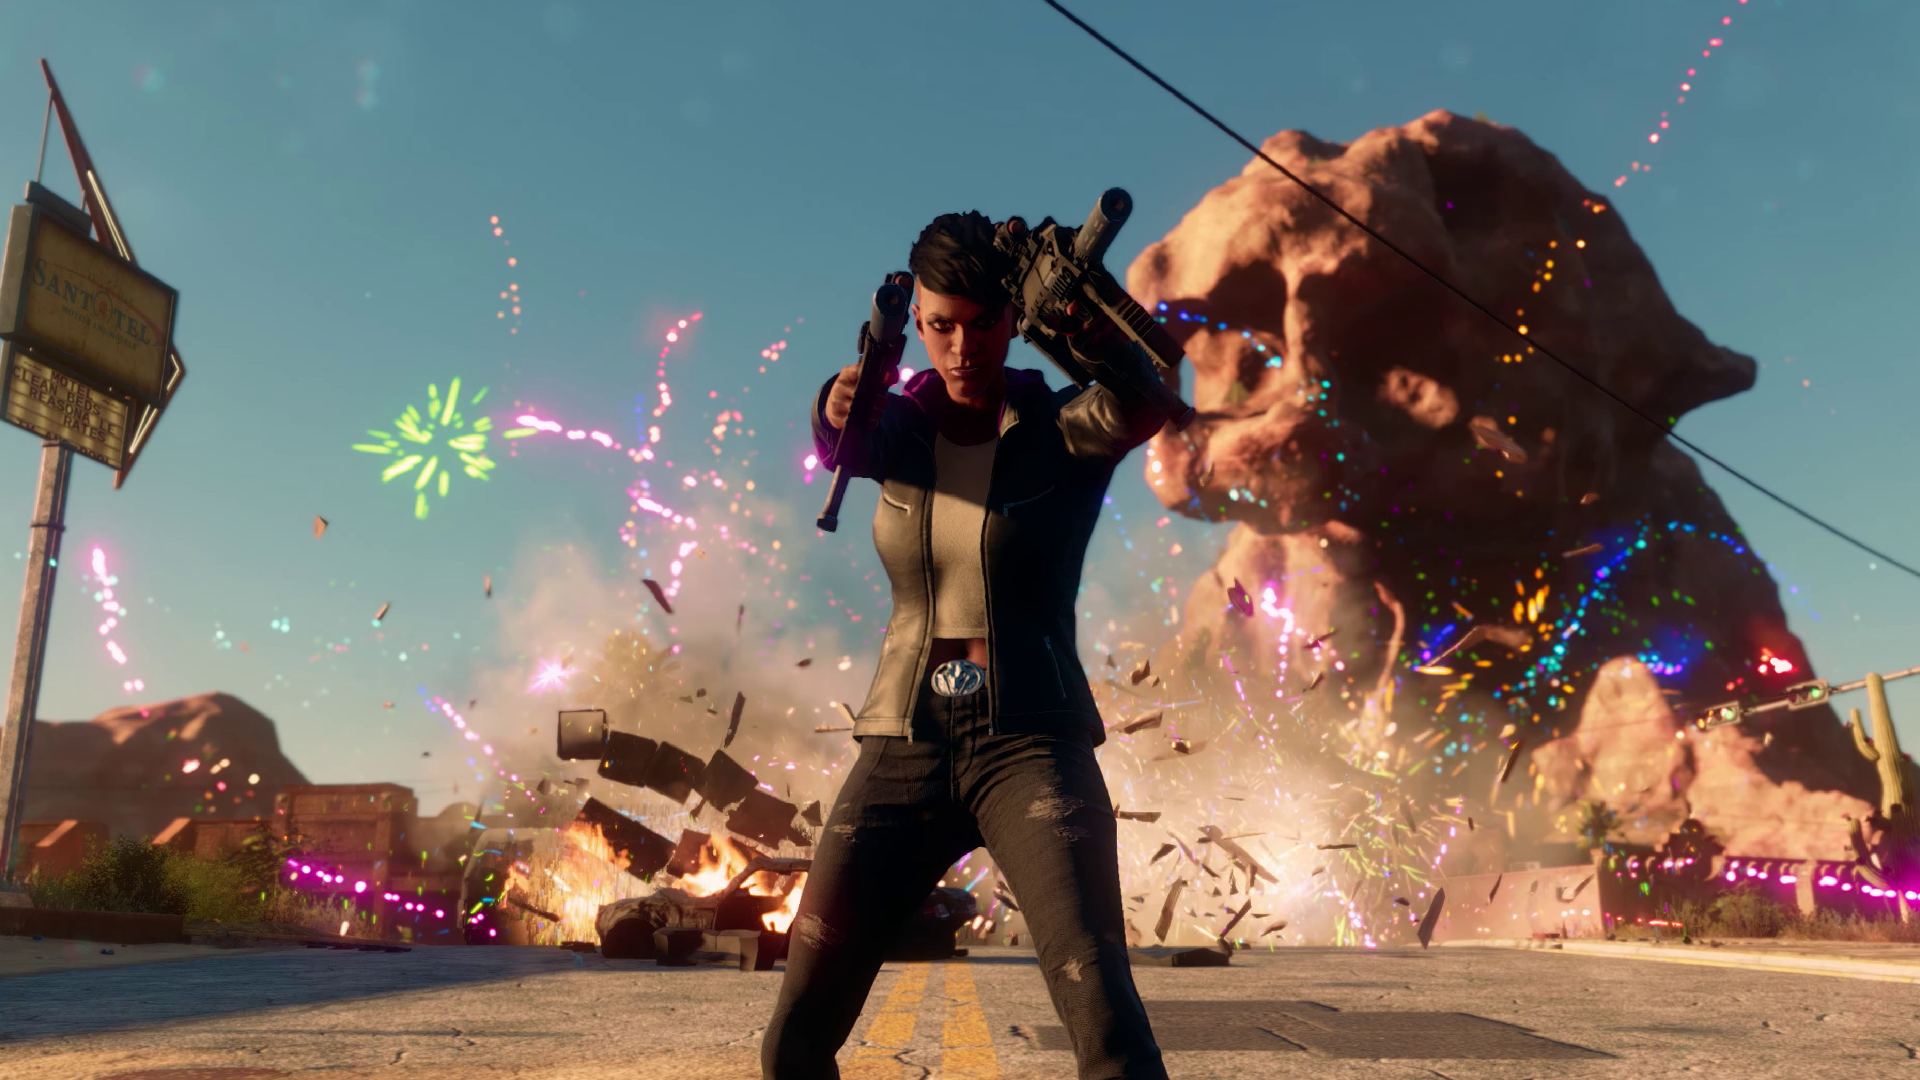 Saints Row Review: A reboot in need of rebooting